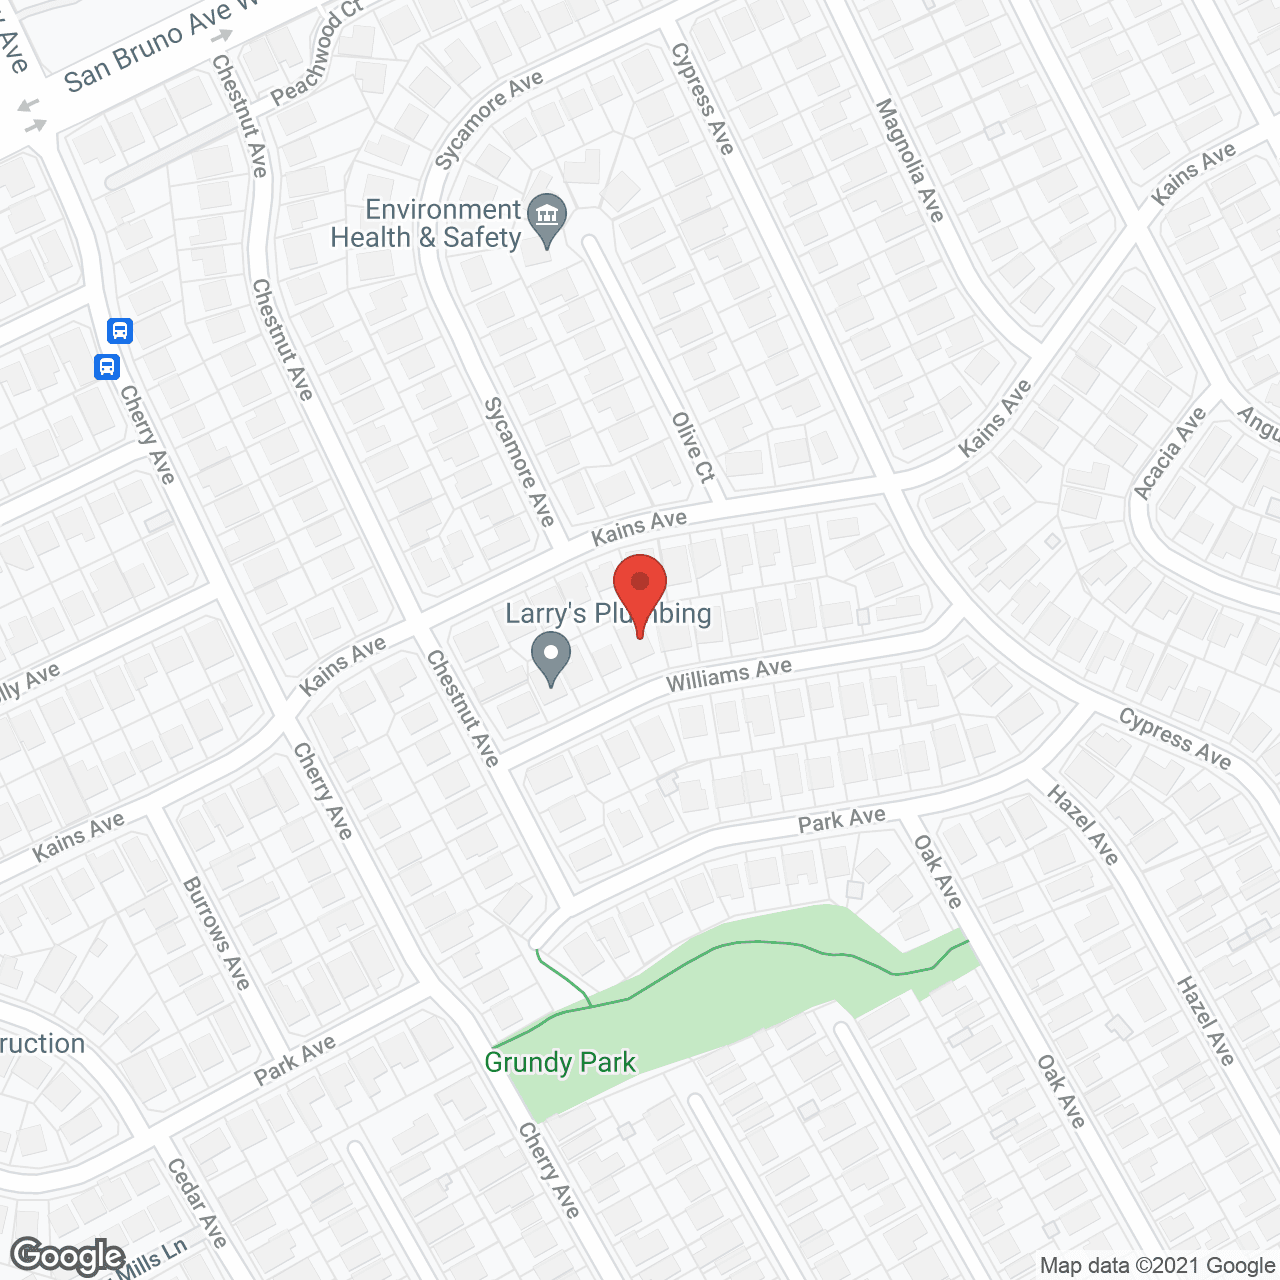 San Bruno Care Home in google map